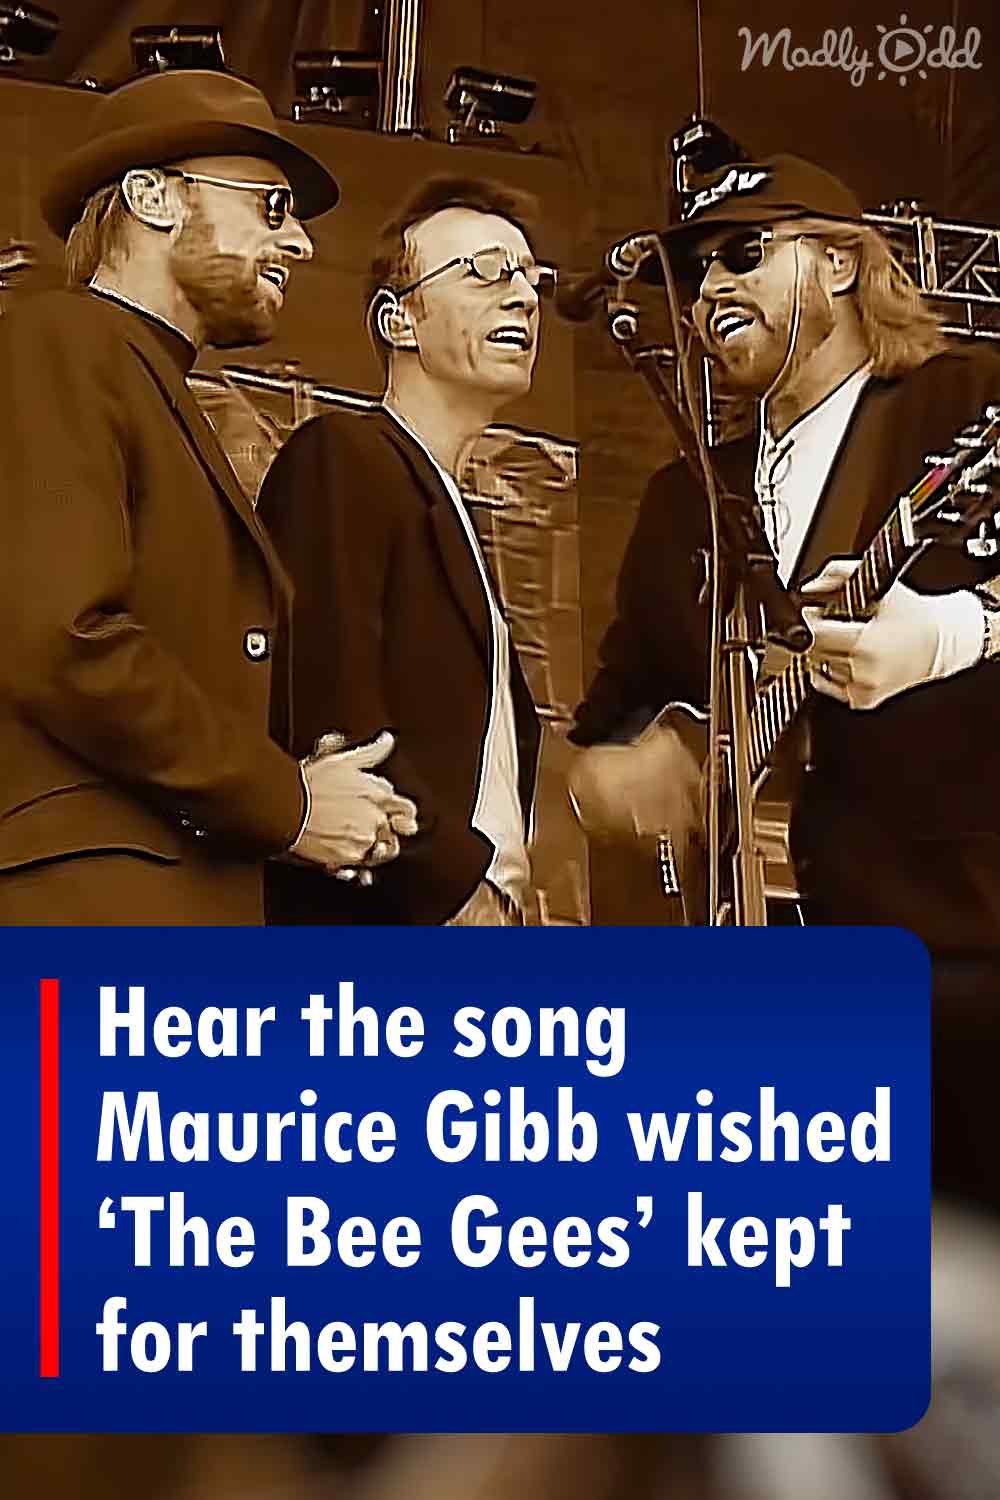 Hear the song Maurice Gibb wished ‘The Bee Gees’ kept for themselves